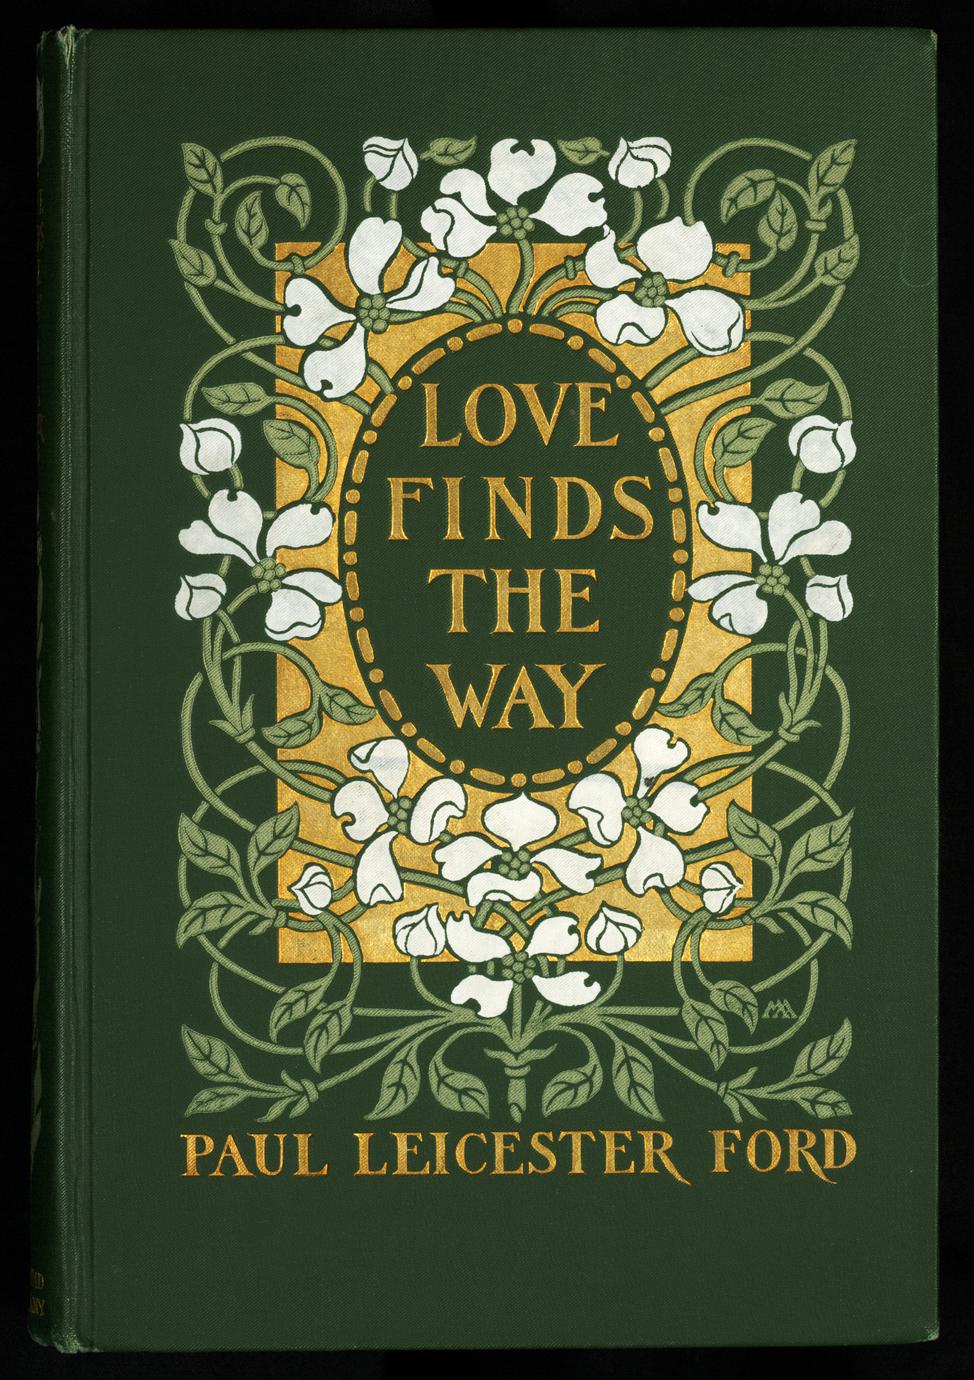 Love finds the way (1 of 3)